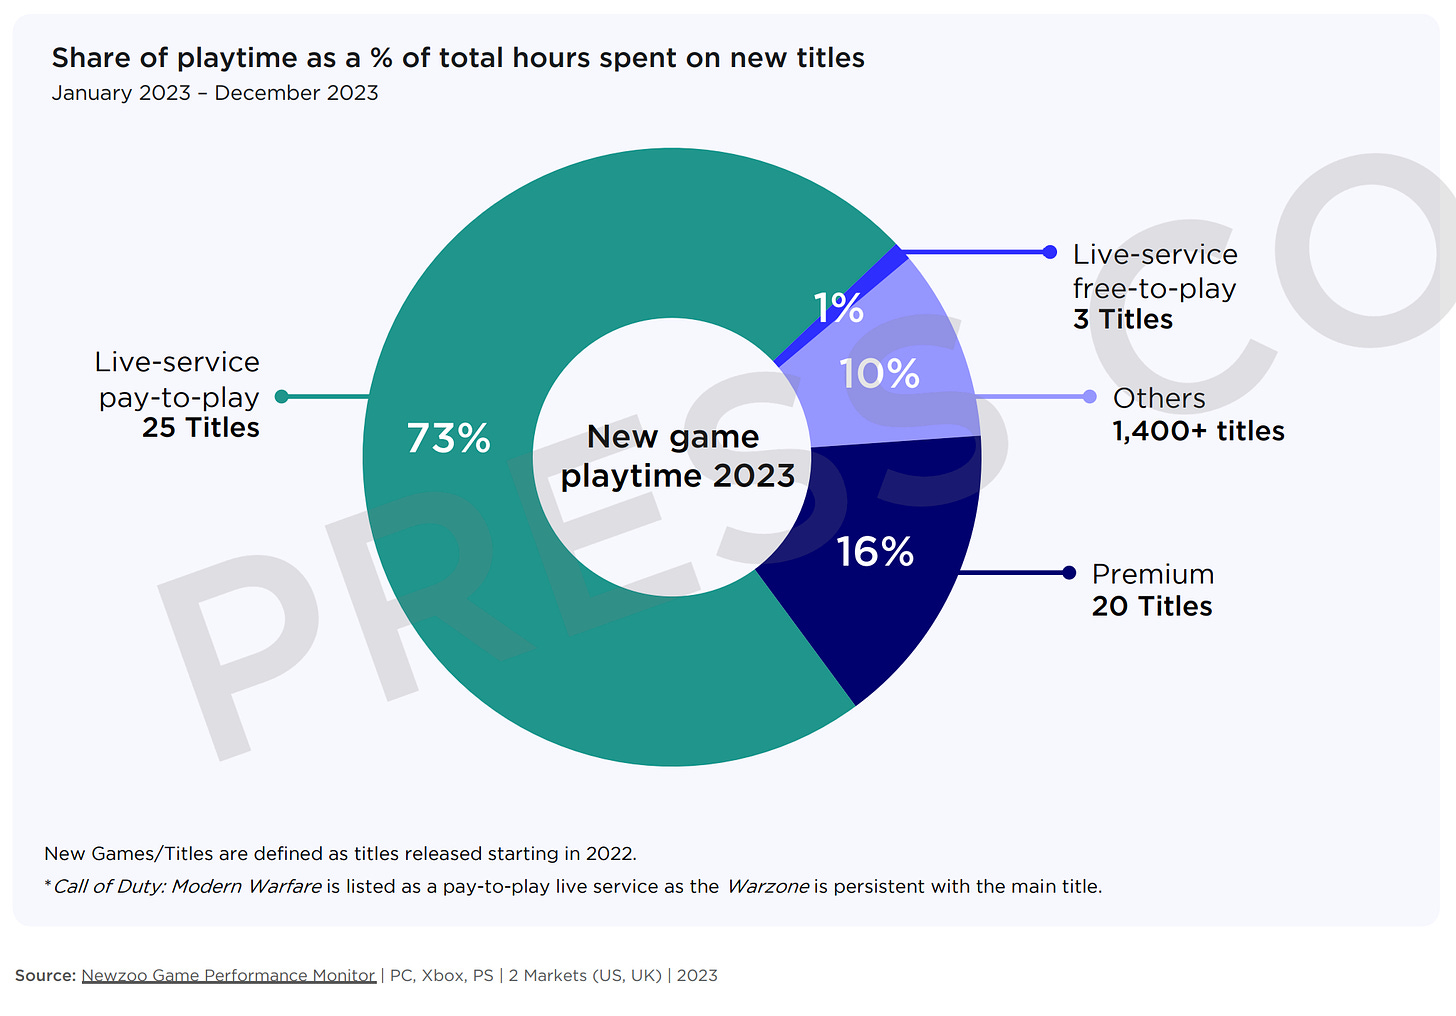 2023 new game playtime